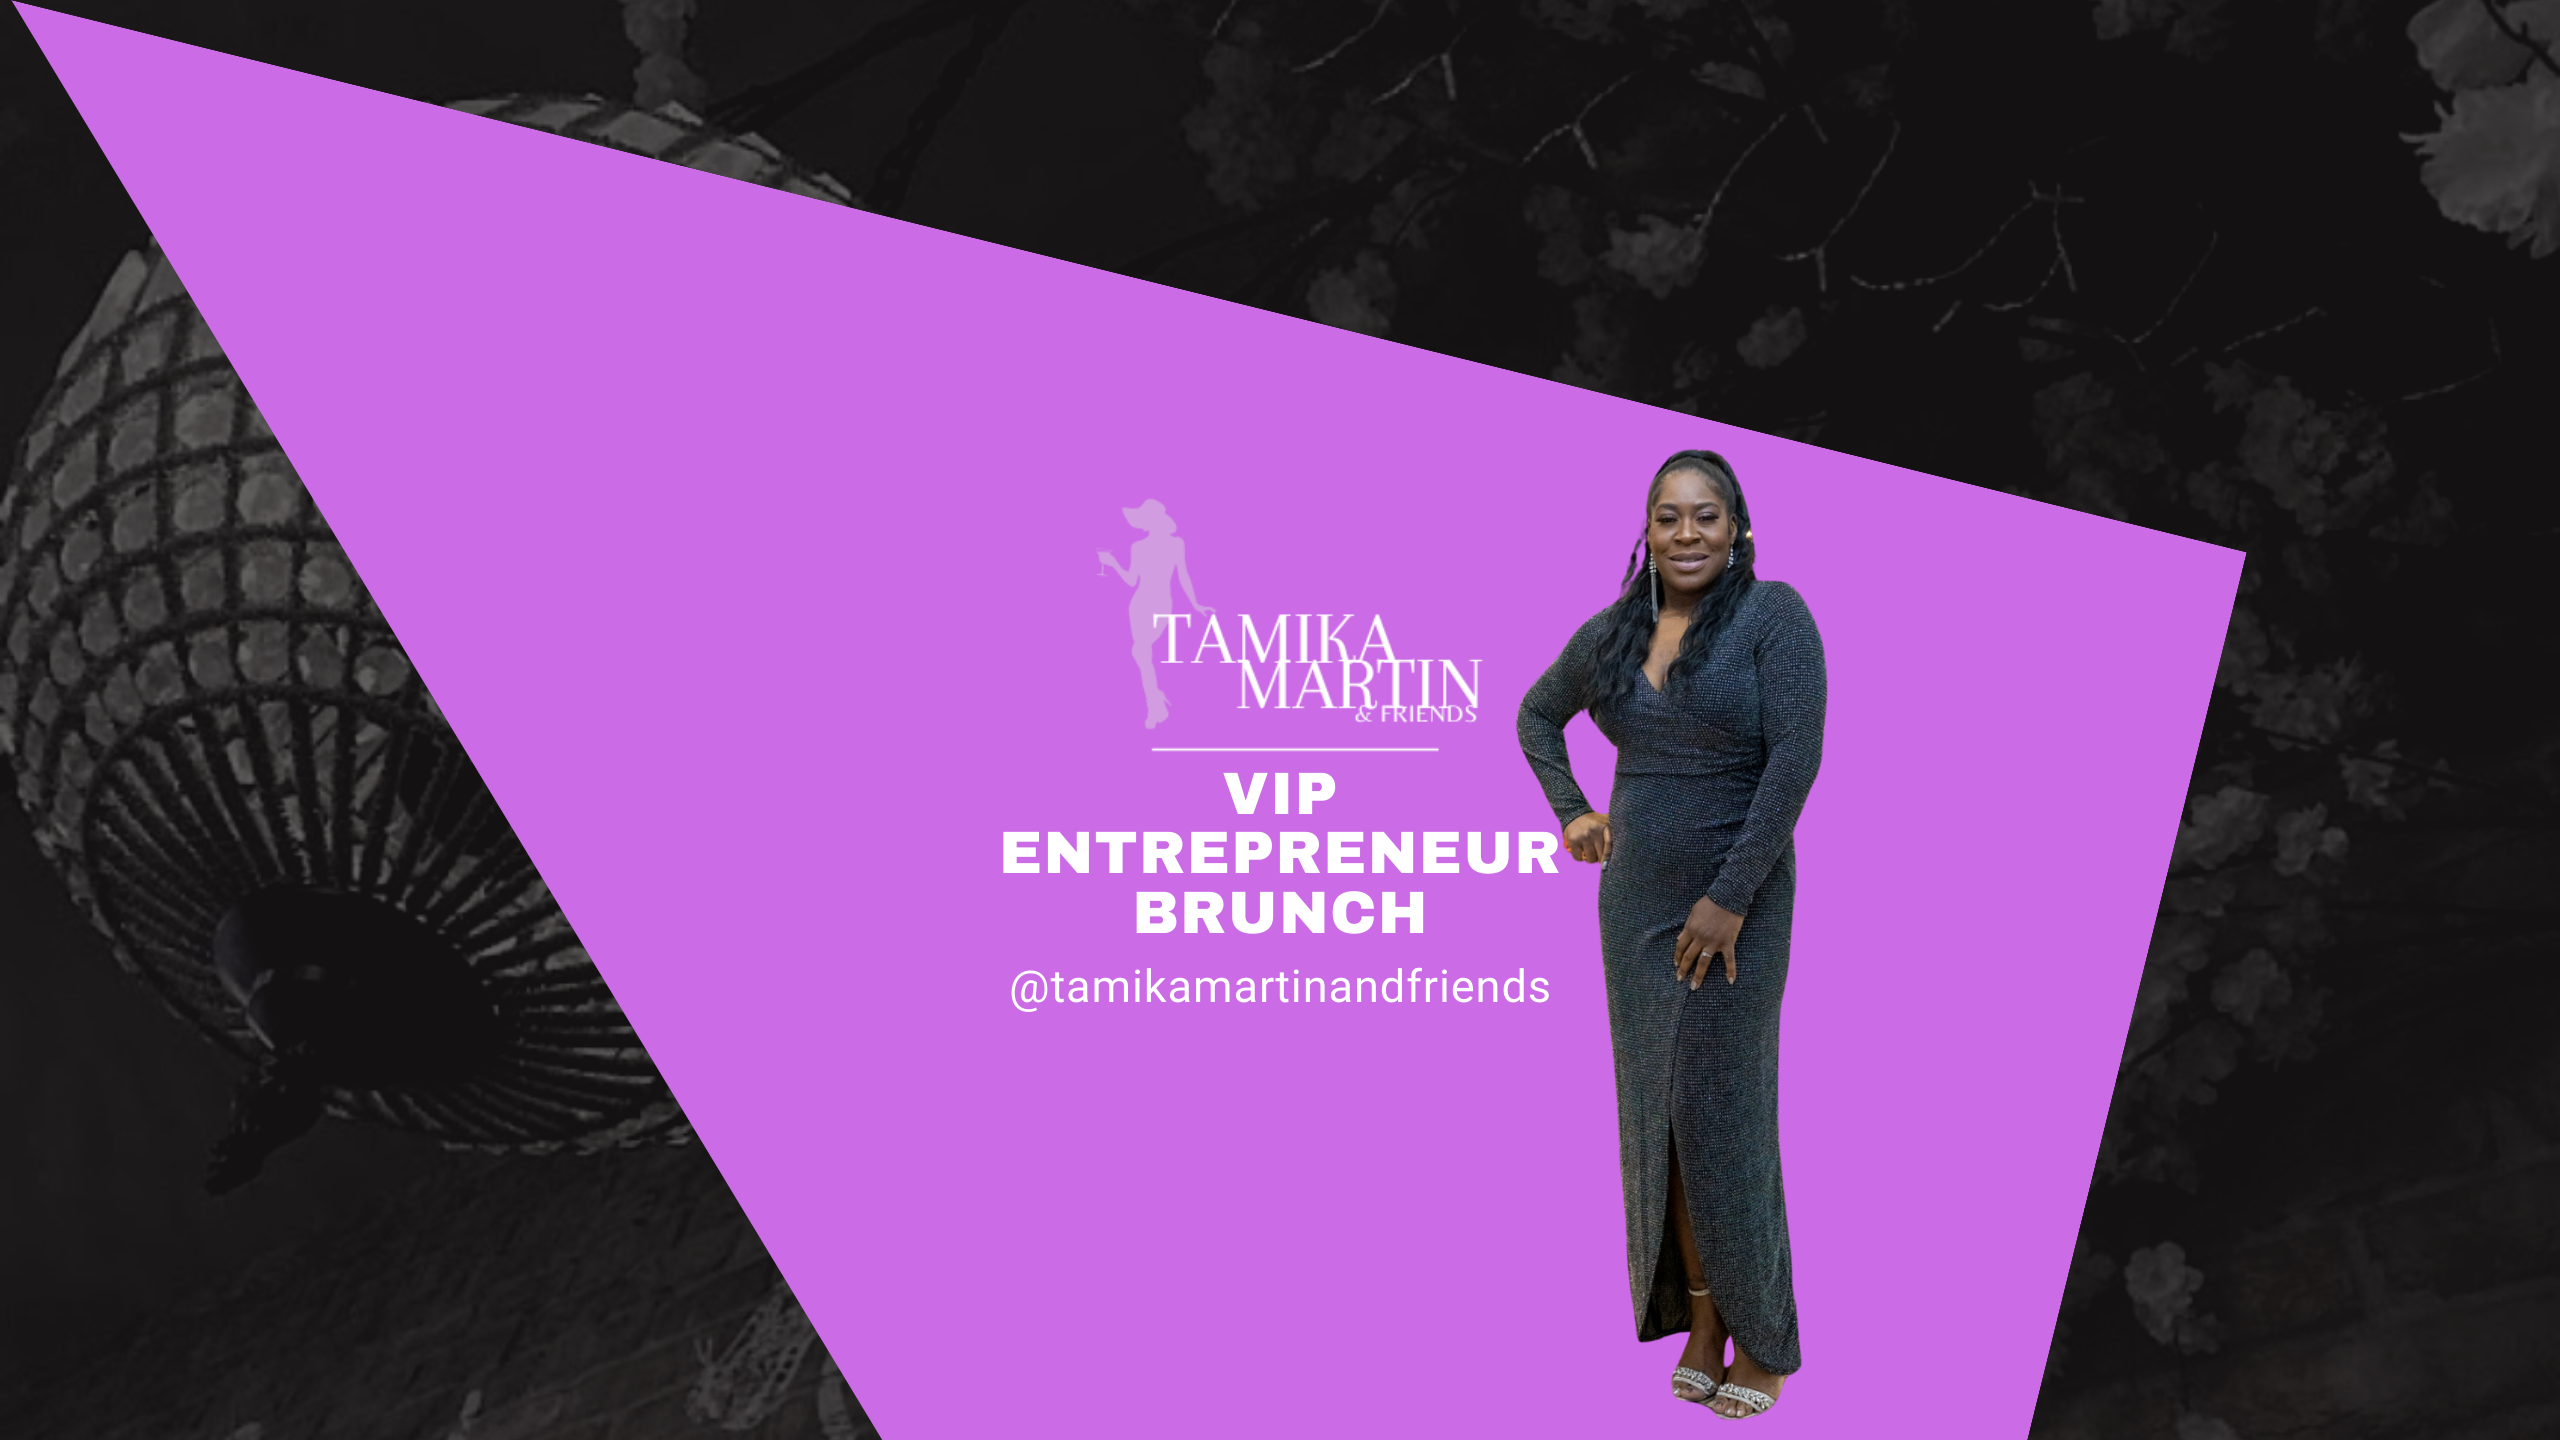 Tamika Martin & Friends VIP Entrepreneur Brunch Garden Party Edition ft Lystra Adams from Housewives of Cheshire 